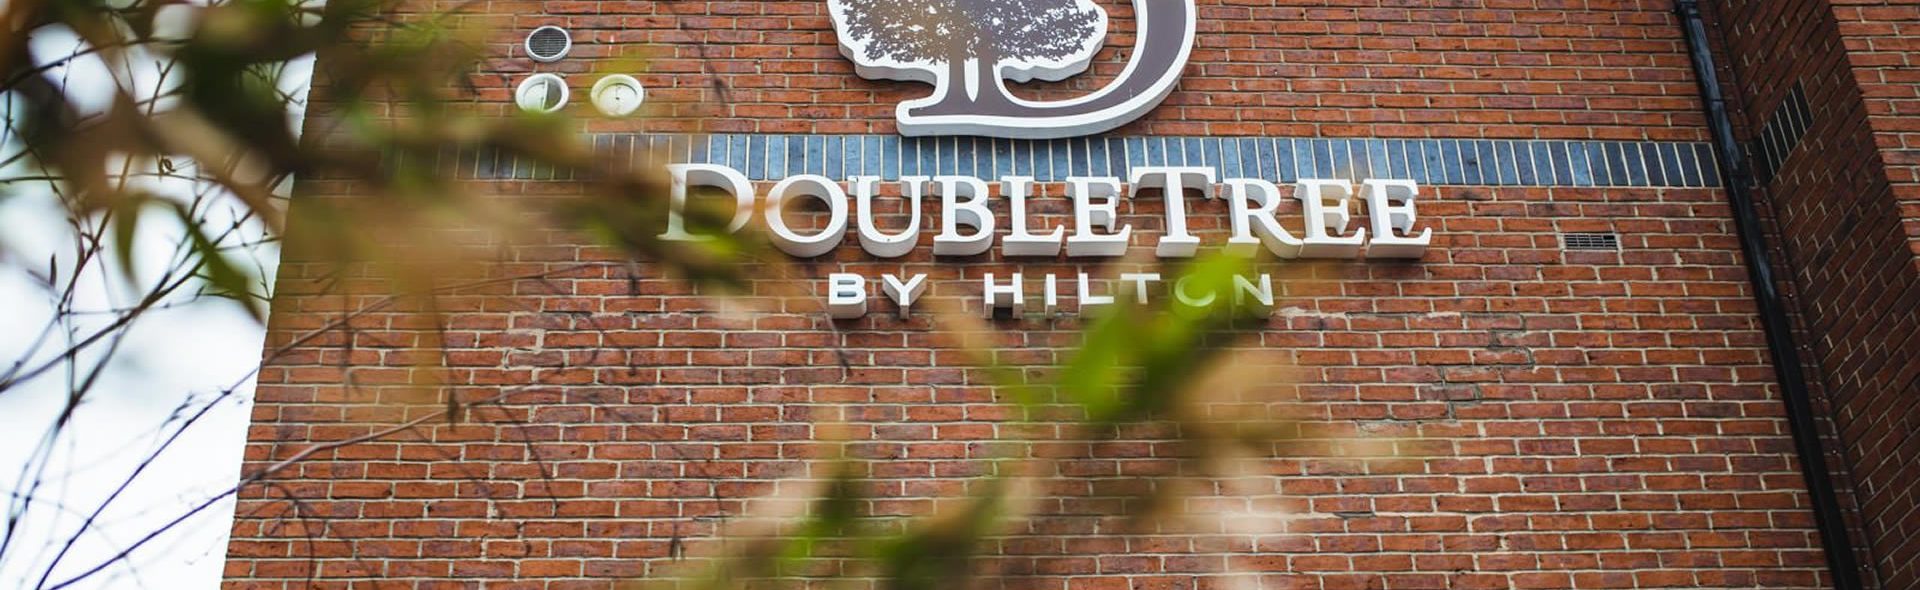 DoubleTree by Hilton York, North Yorkshire